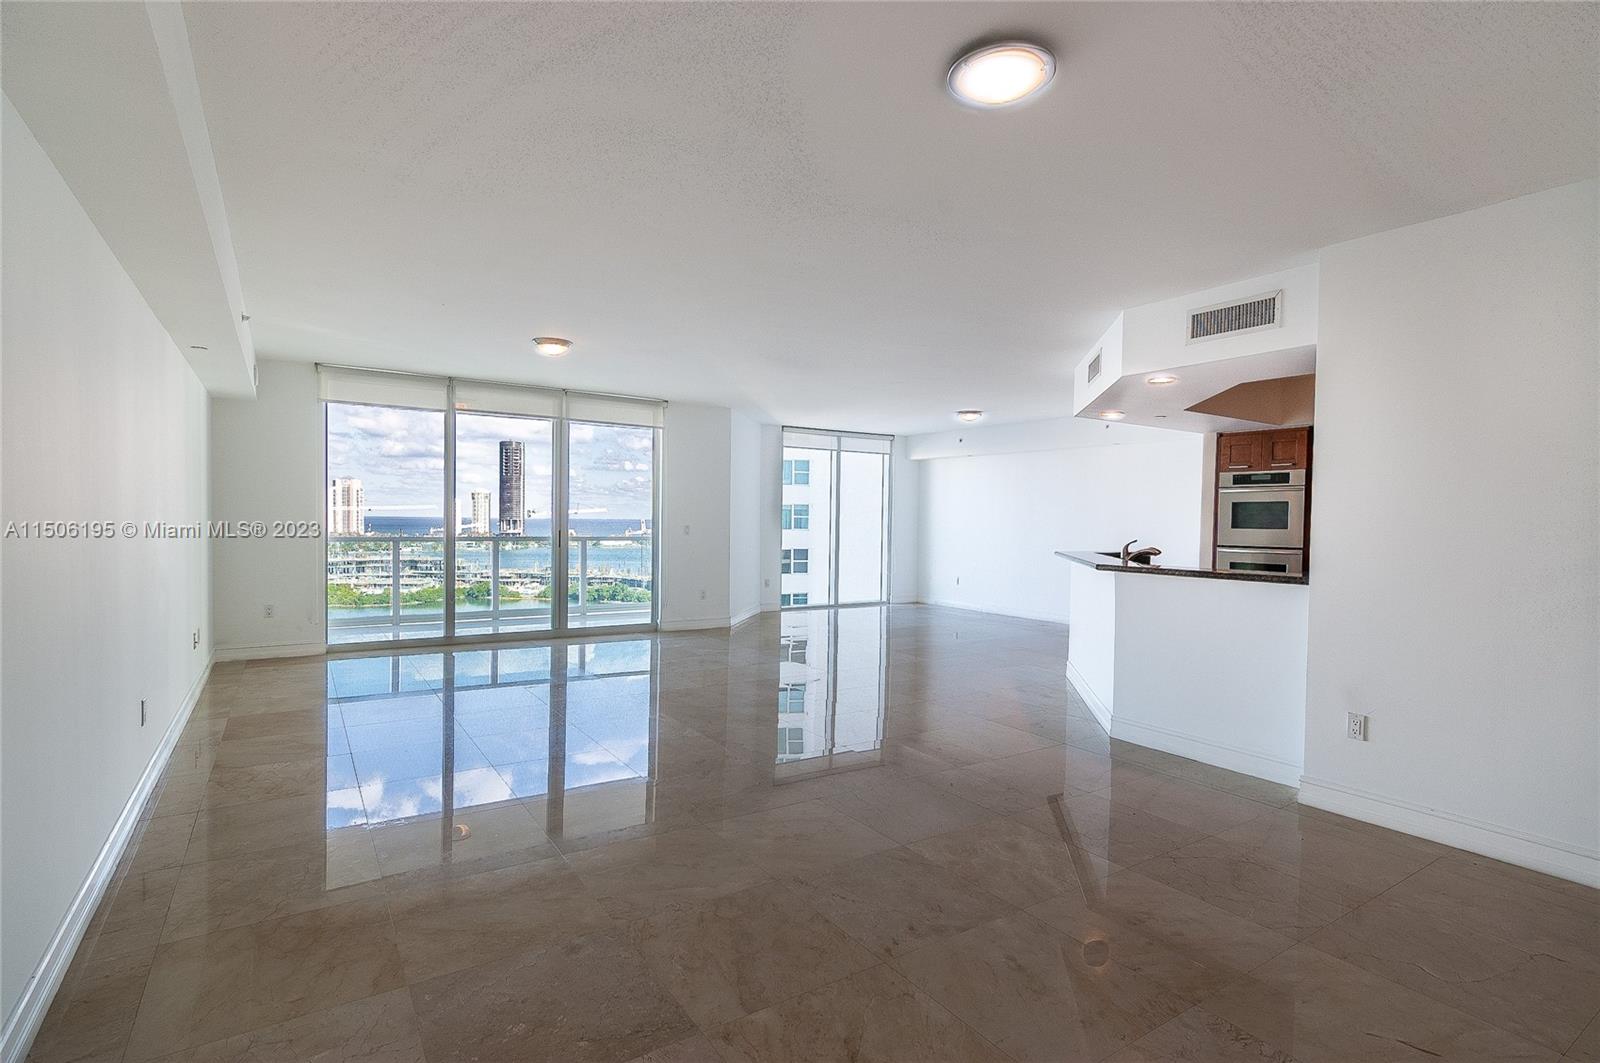 MUST SEE !!!! ONE OF THE MOST BEAUTIFUL BUILDINGS IN AVENTURA, SPECTACULAR OCEAN AND INTRACOASTAL VIEWS. 3 BED + 3 1/2 BATH, ALL BEDROOMS ARE IN SUITES, HUGE DEN, TWO BALCONIES, CUSTOM MADE CLOSETS, MARBLE FLOORS THROUGHOUT THE WHOLE UNIT, 2 POOLS, FULL SERVICE SPA, GYM, TENNIS COURTS, INSIDE AND OUTSIDE PLAYGROUNDS, BBQ AREA, WALKING DOG AREA, 24/7 SECURITY AND VALET PARKING, 5 MINUTES TO AVENTURA MALL, BANKS, SUPERMARKETS AND MORE...!!!! Easy Showing !! Video Available.